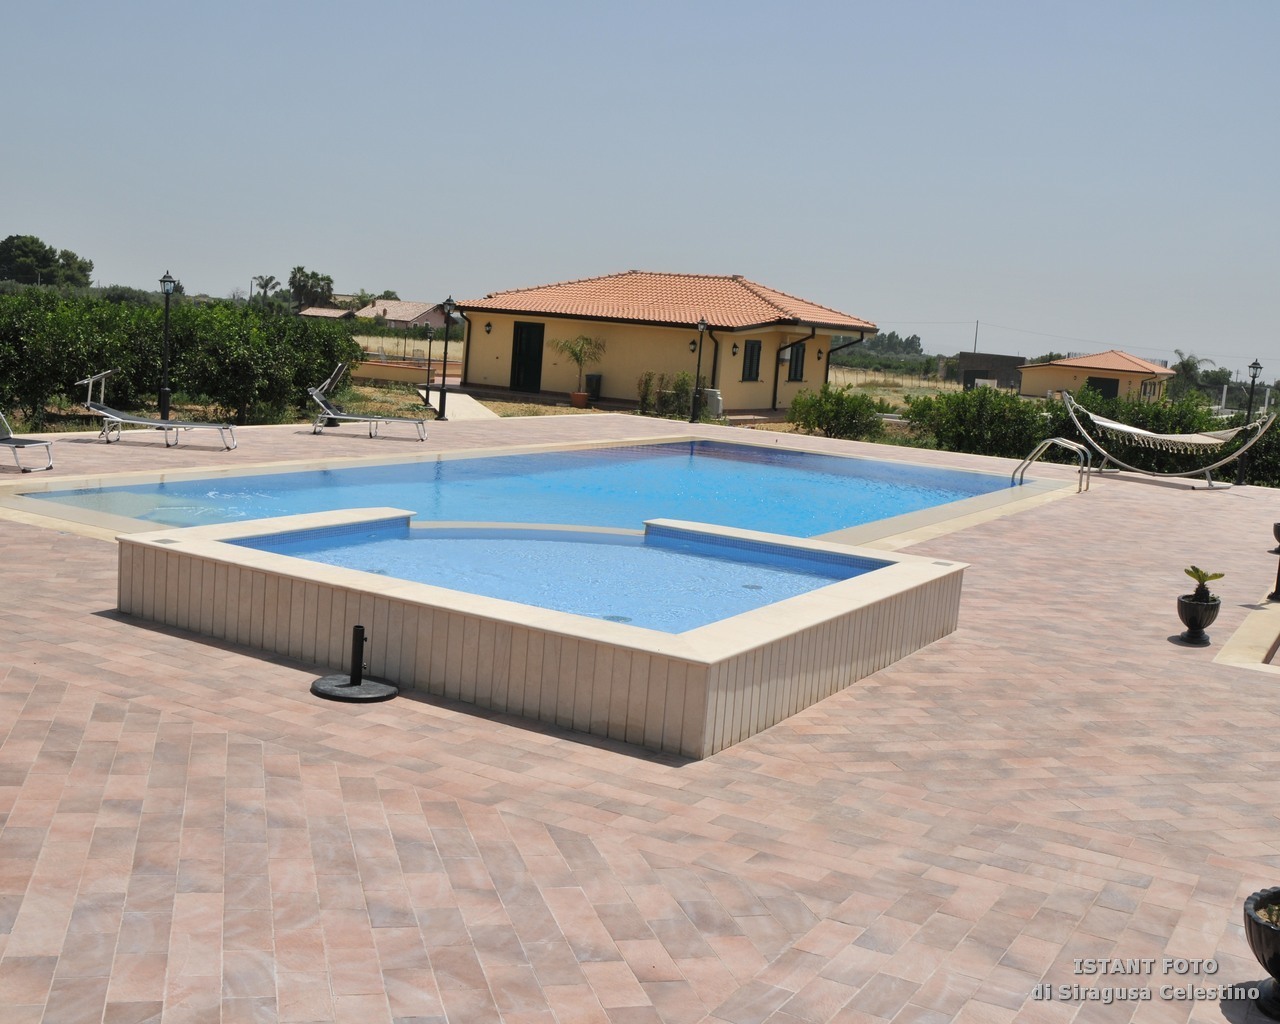 Villa Resort the prestige for sale in the plain of Catania, excellent for commercial use